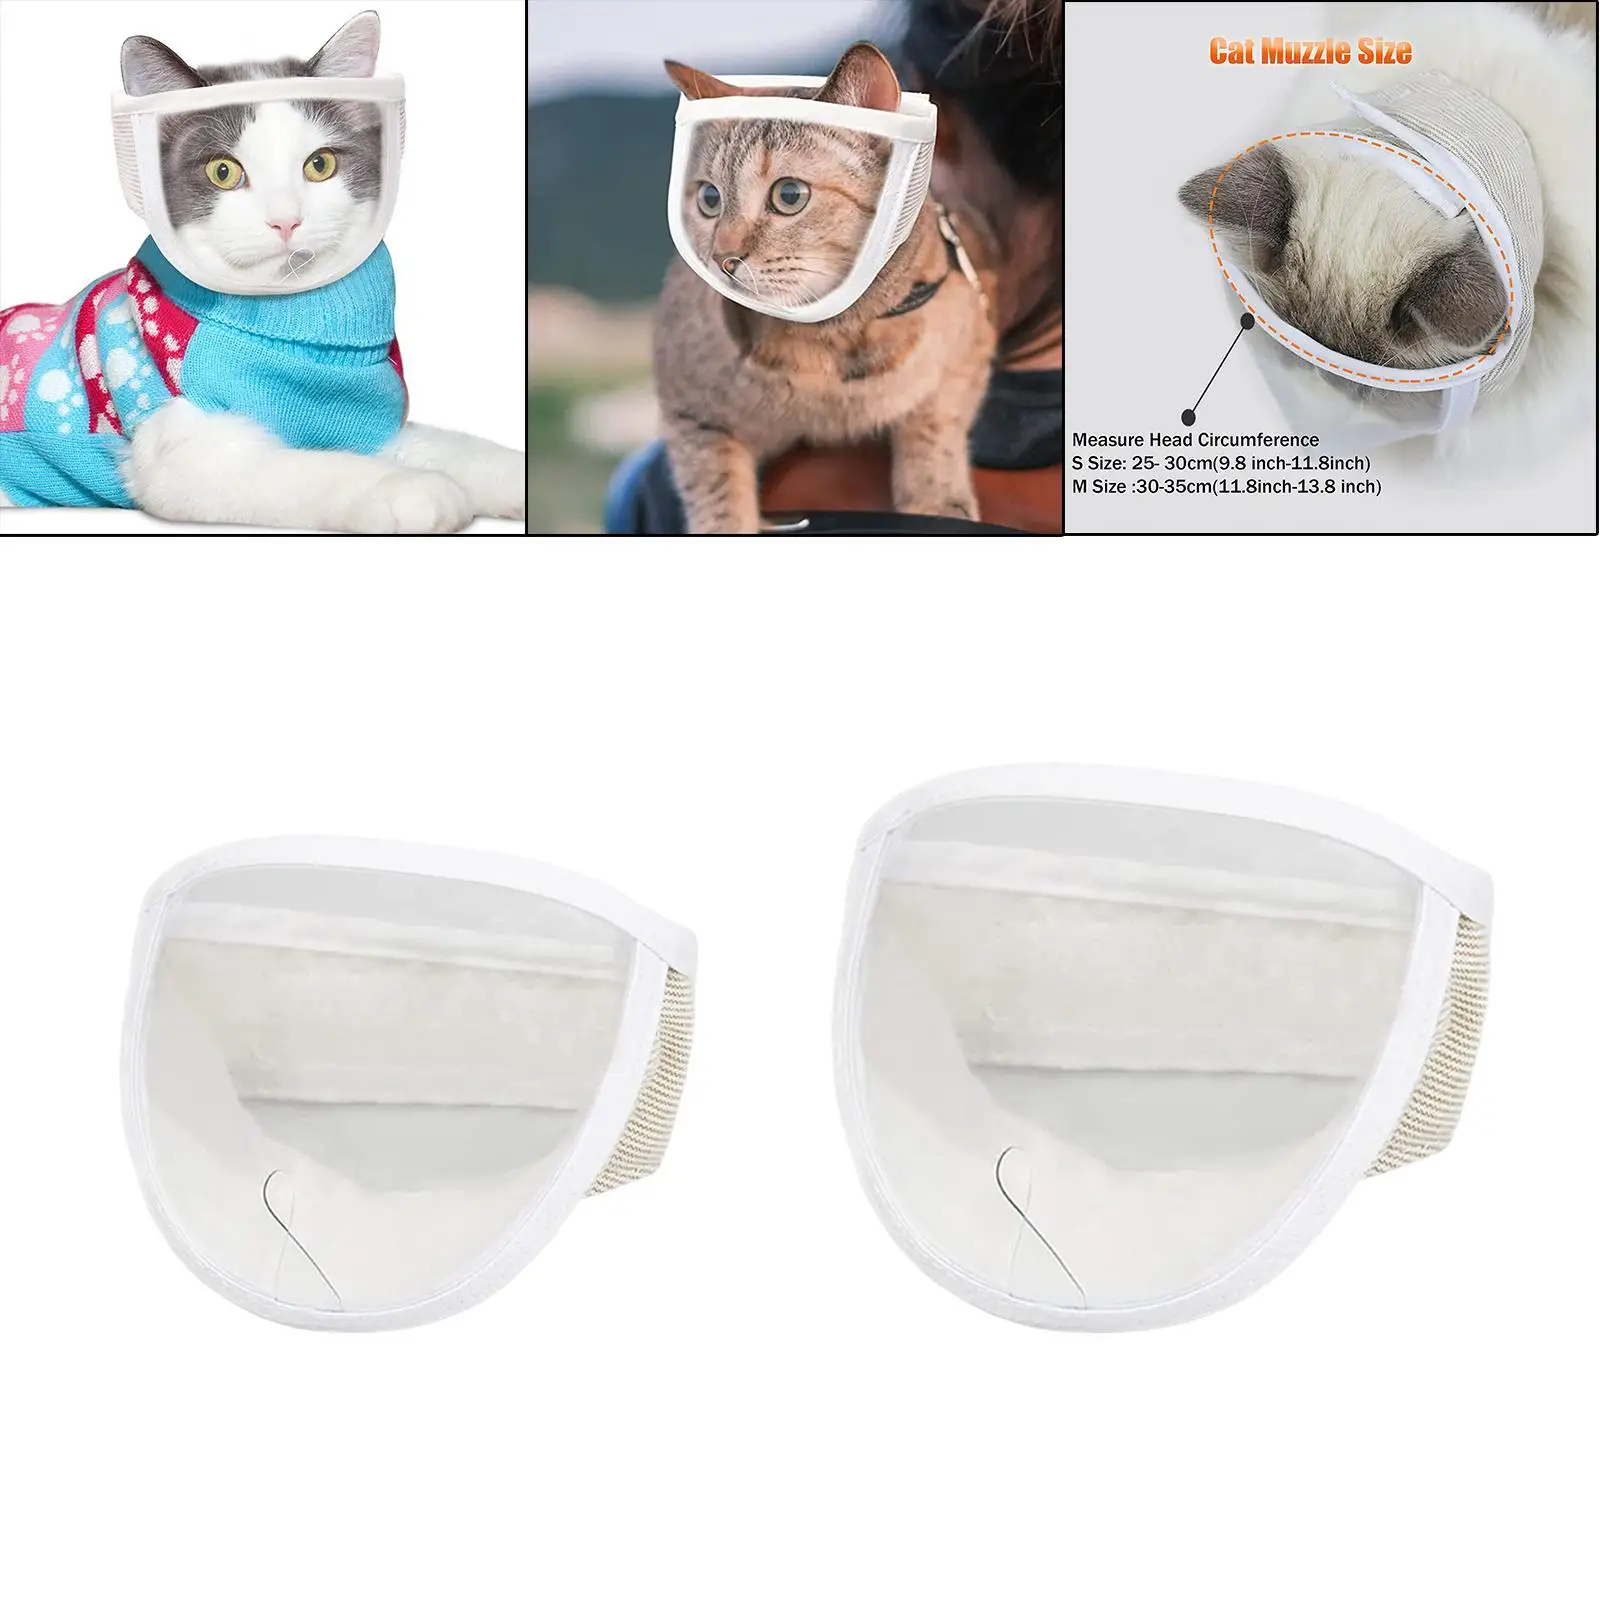 Cat Muzzle Cat Mouth Cover Grooming Mask Muzzles for Trim Nails Grooming